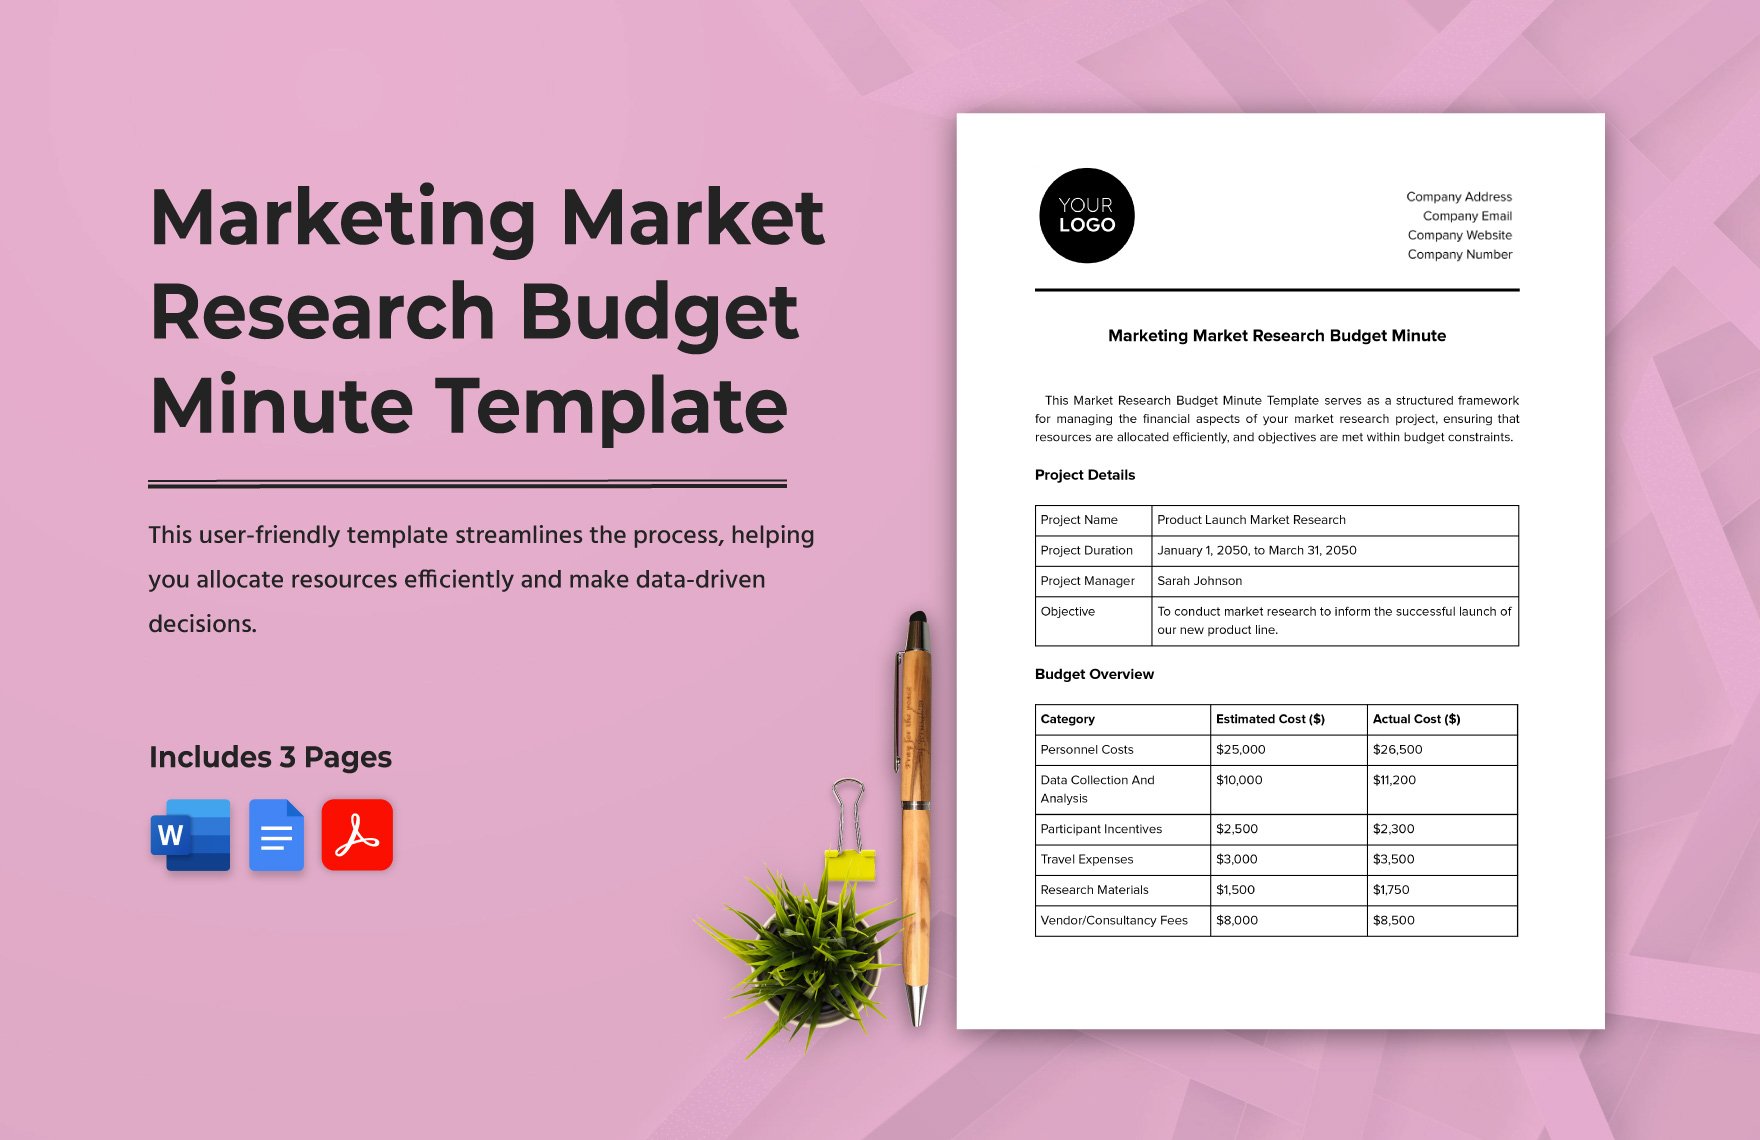 Marketing Market Research Budget Minute Template